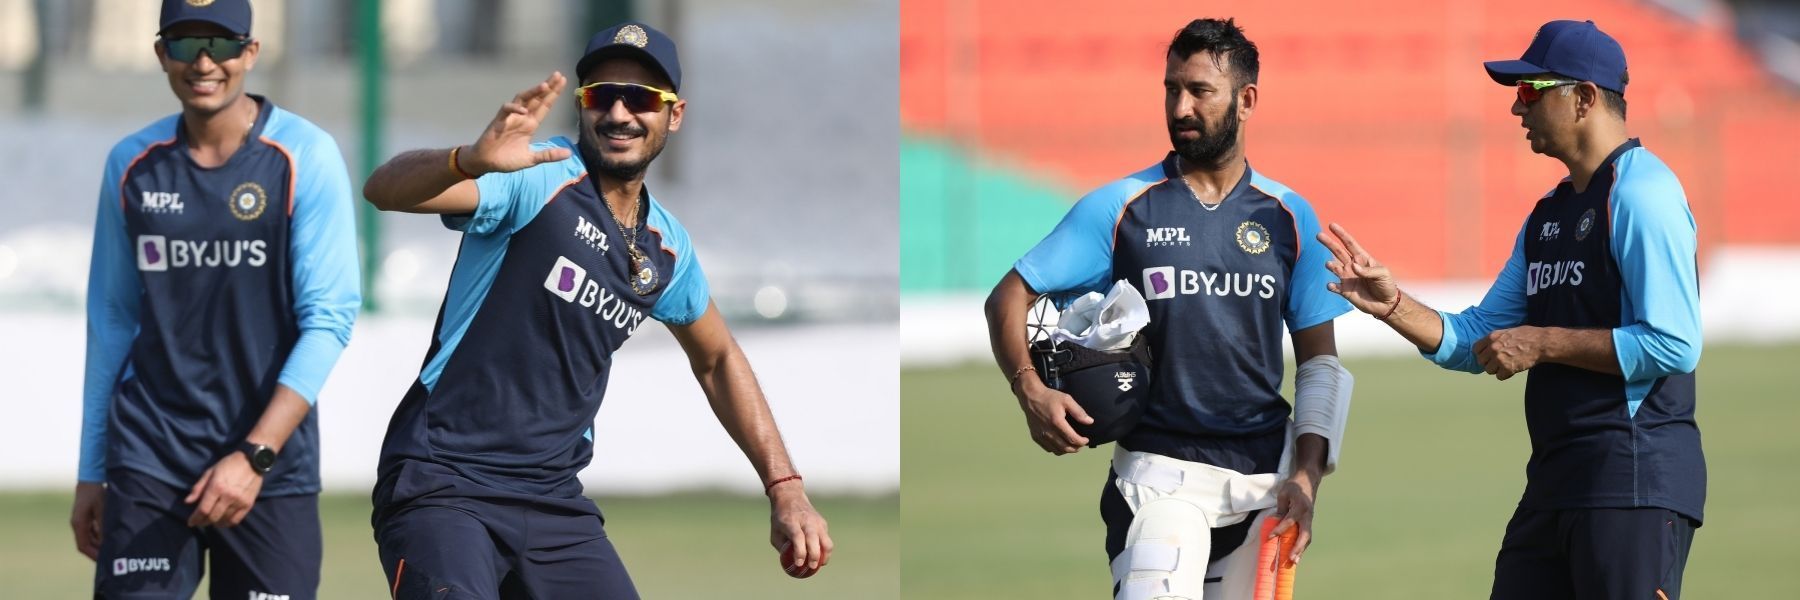 (Left) Shubman Gill and Axar Patel; (Right) Cheteshwar Pujara and Rahul Dravid during Team India&rsquo;s practice session. Pic: BCCI